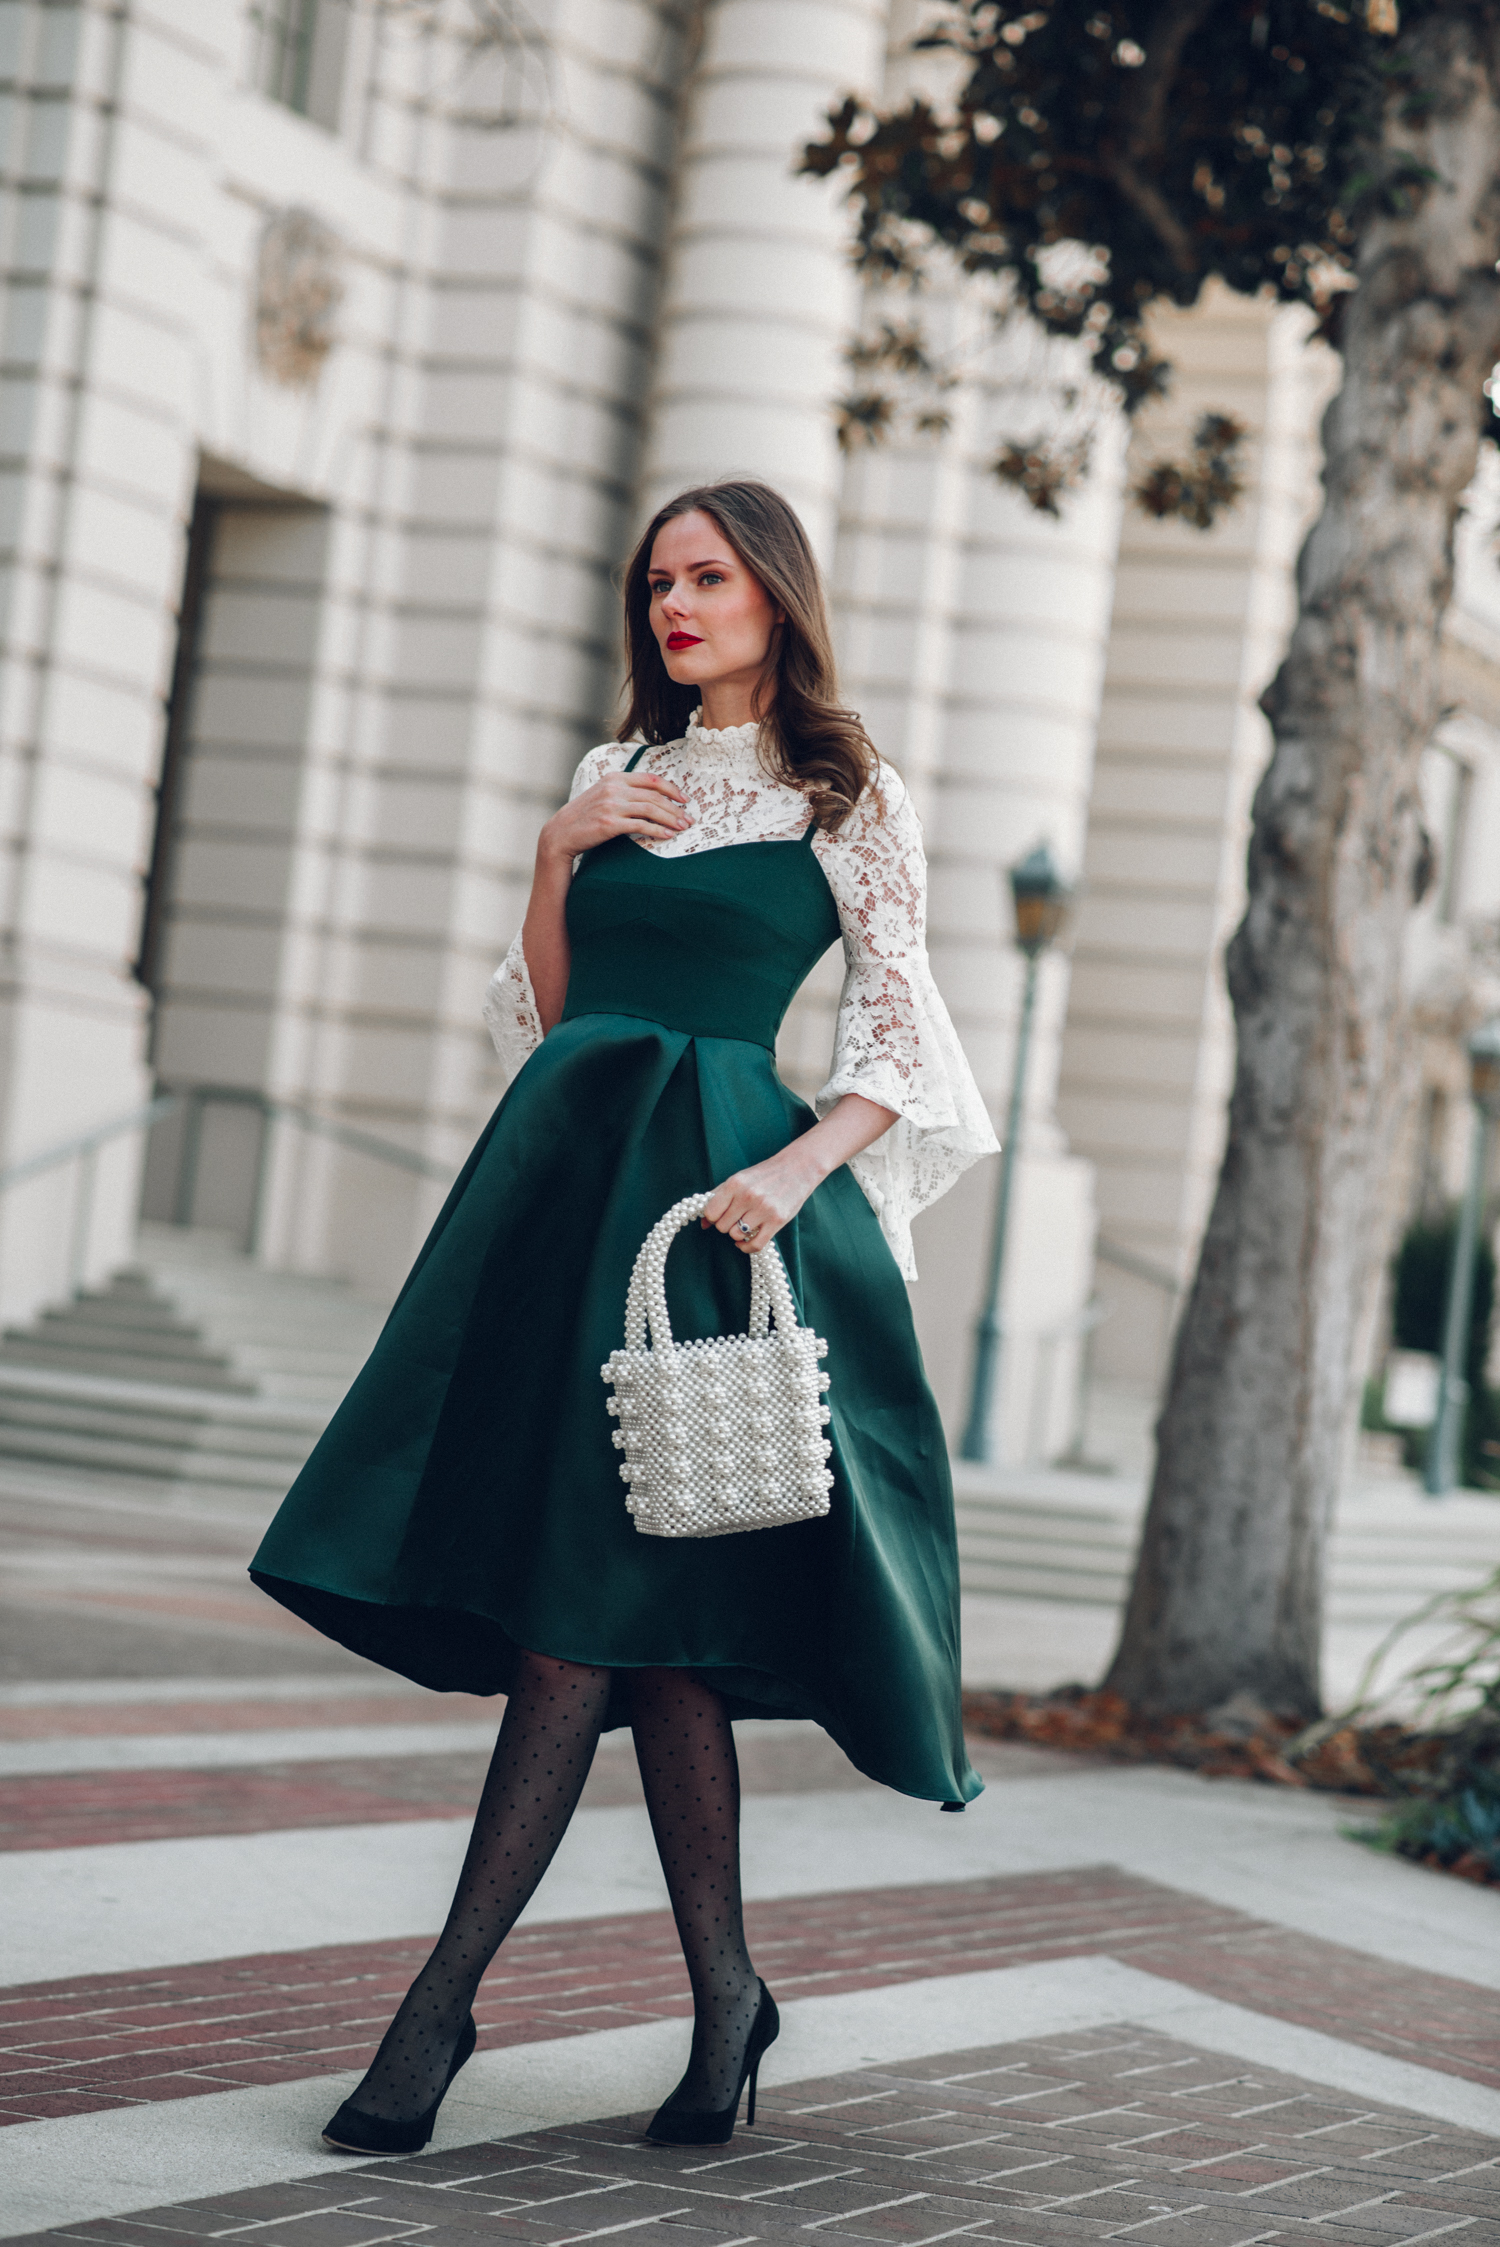 Alyssa Campanella of The A List blog shares her holiday looks wearing Hutch birdie dress